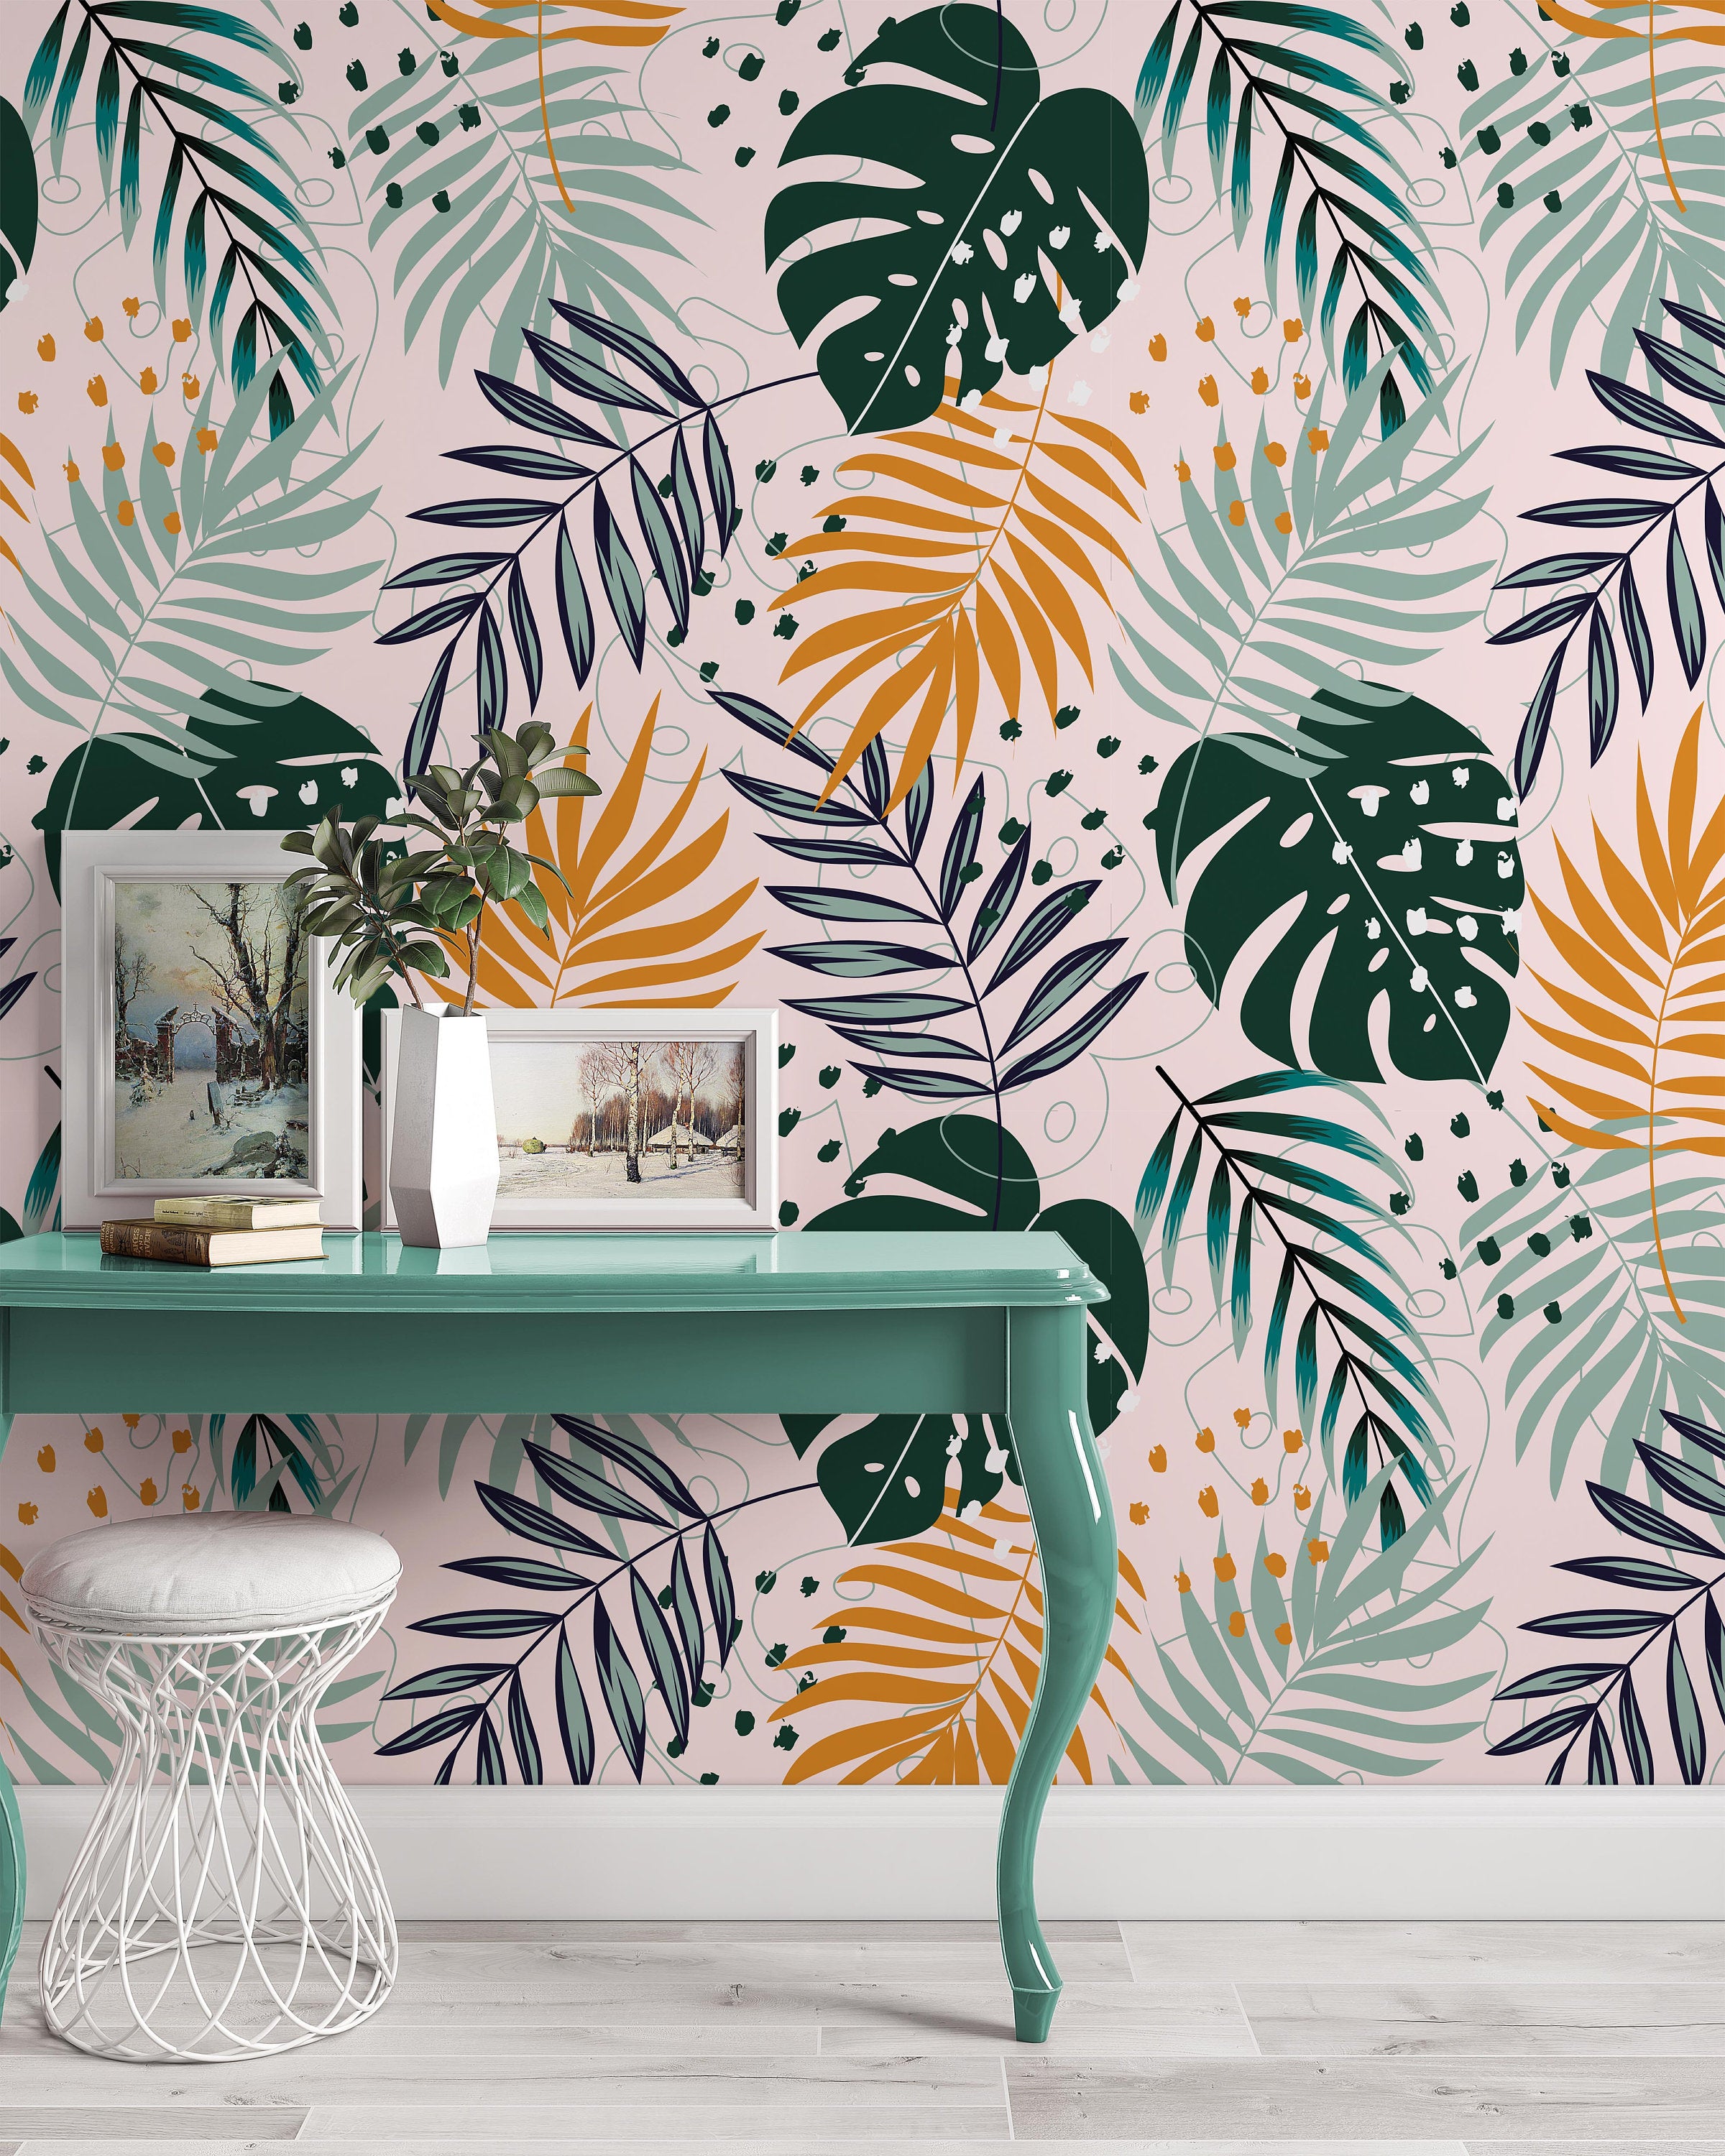 Abstract Tropical Leaves and Bright Plants Summer Trend Wallpaper Self Adhesive Peel and Stick Wall Sticker Wall Decoration Removable